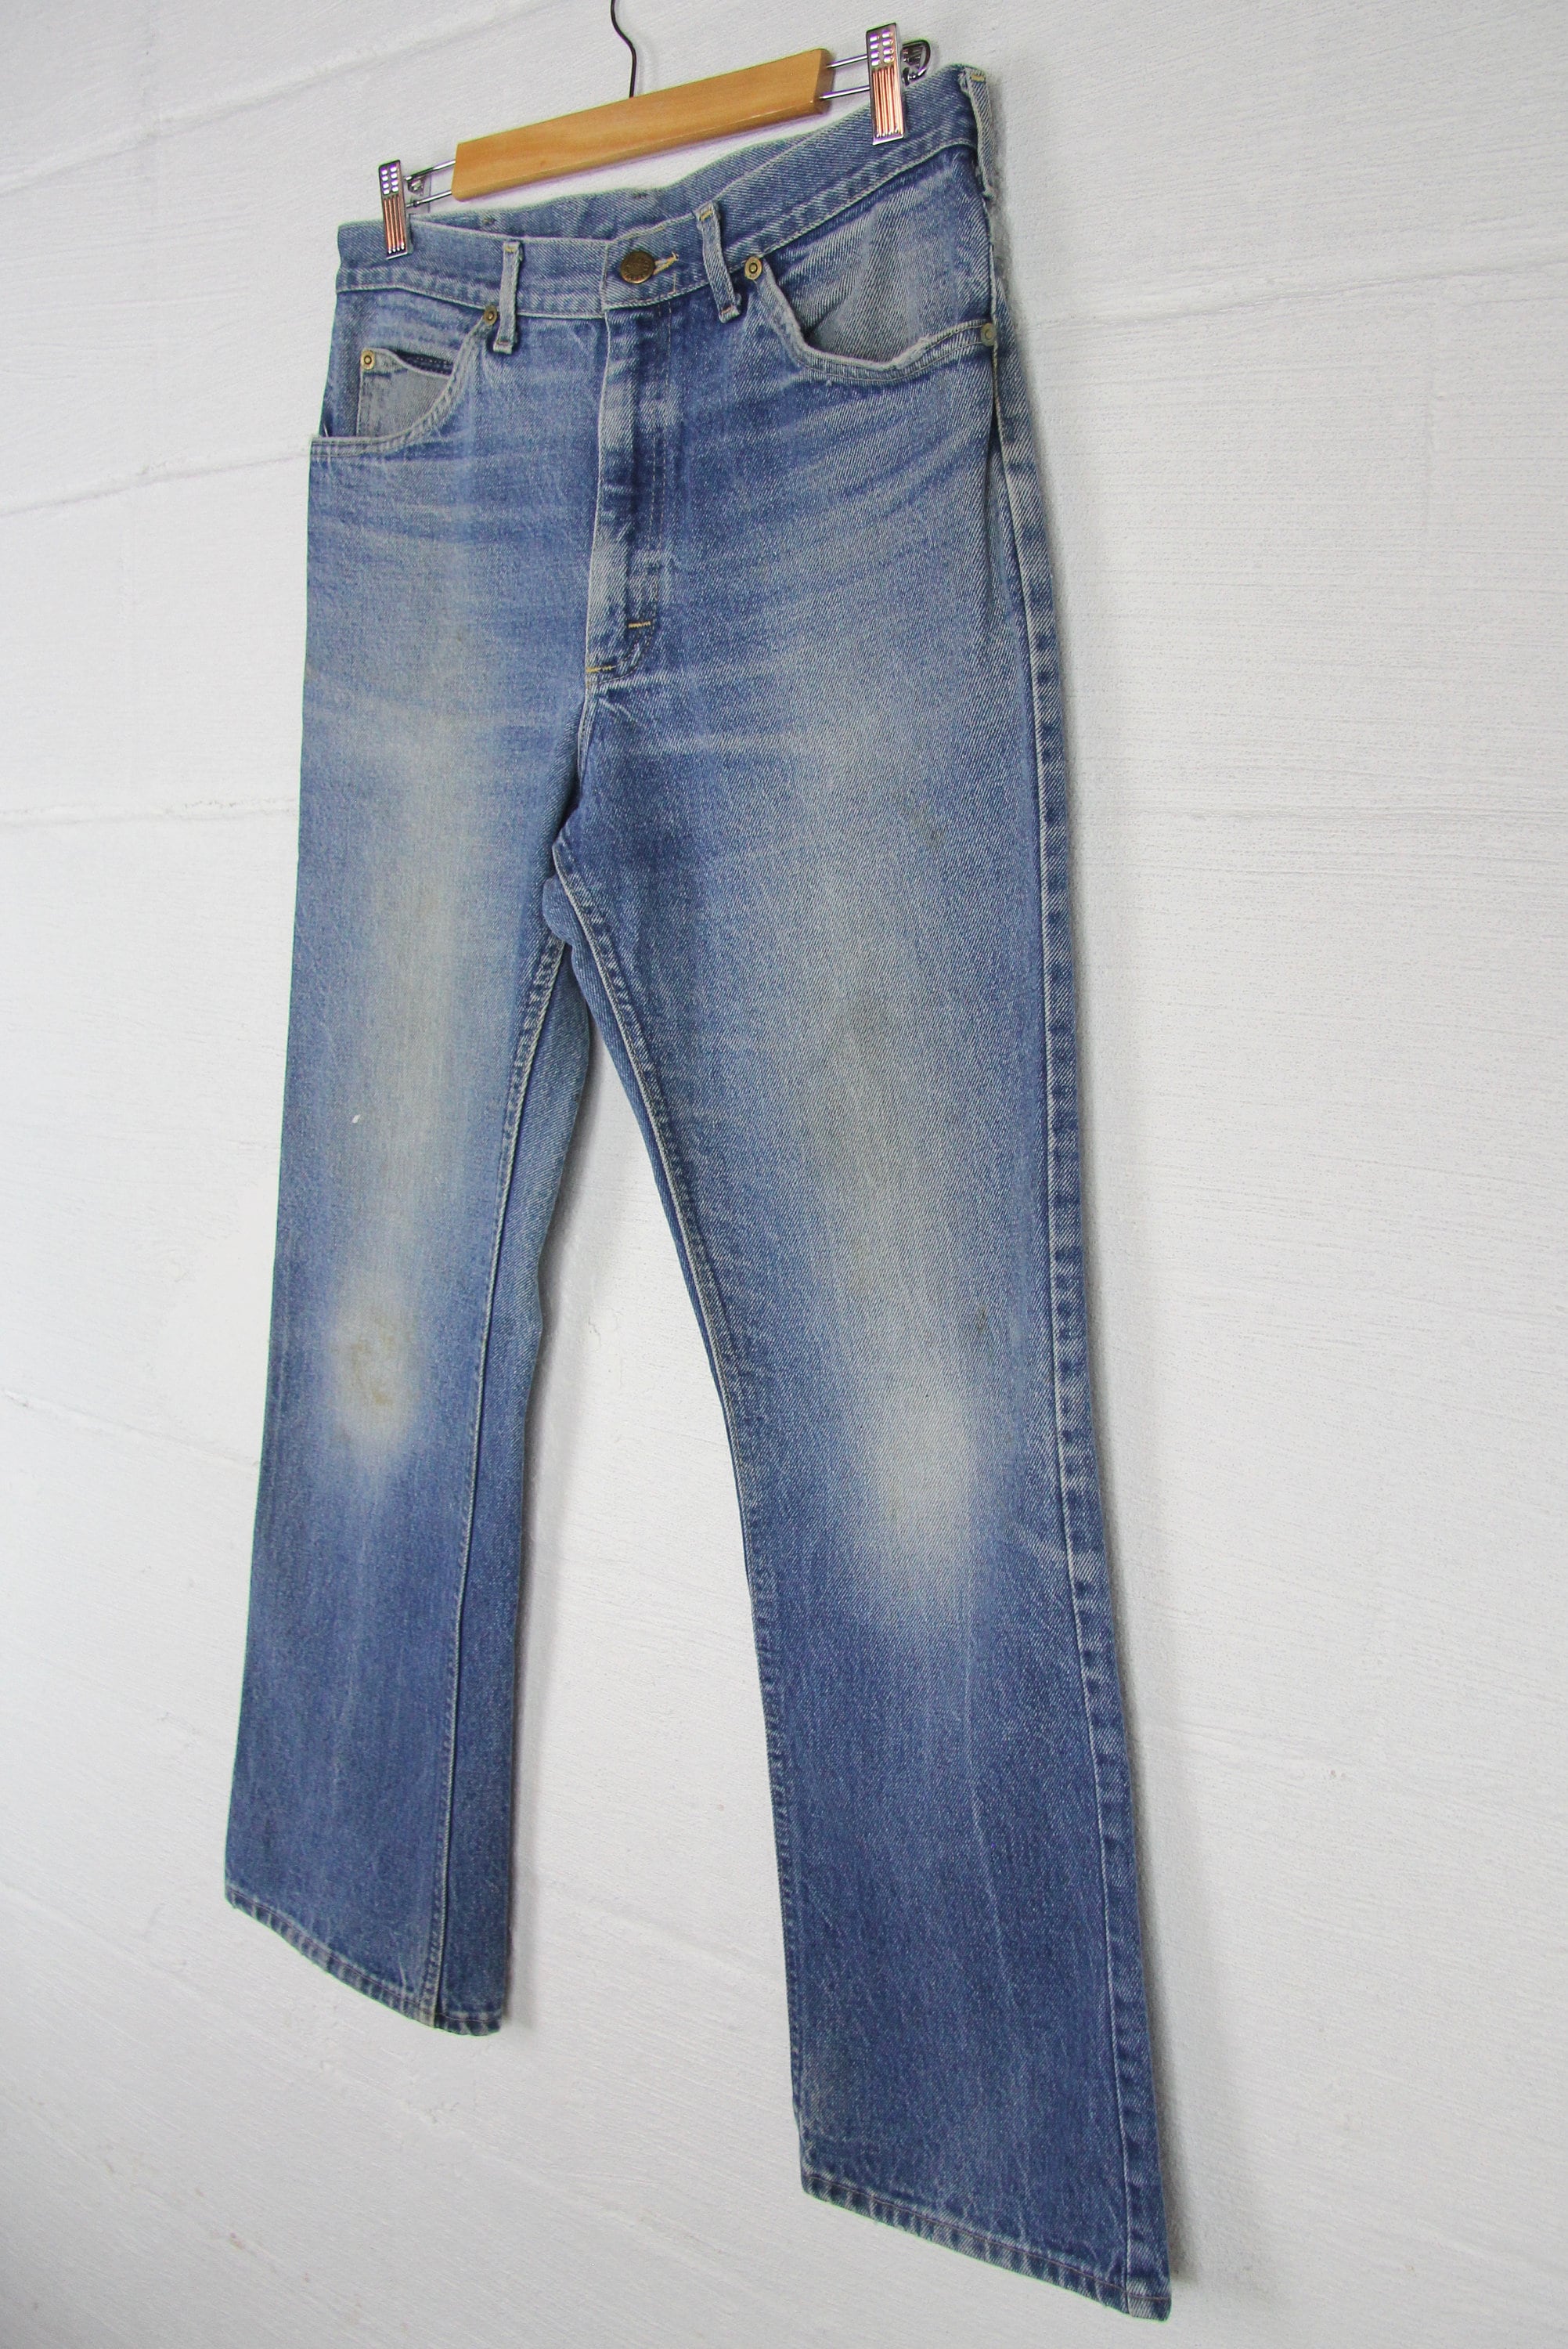 70s Straight Leg Lee Riders Jeans Vintage Faded Thick Denim Jeans 32 x ...